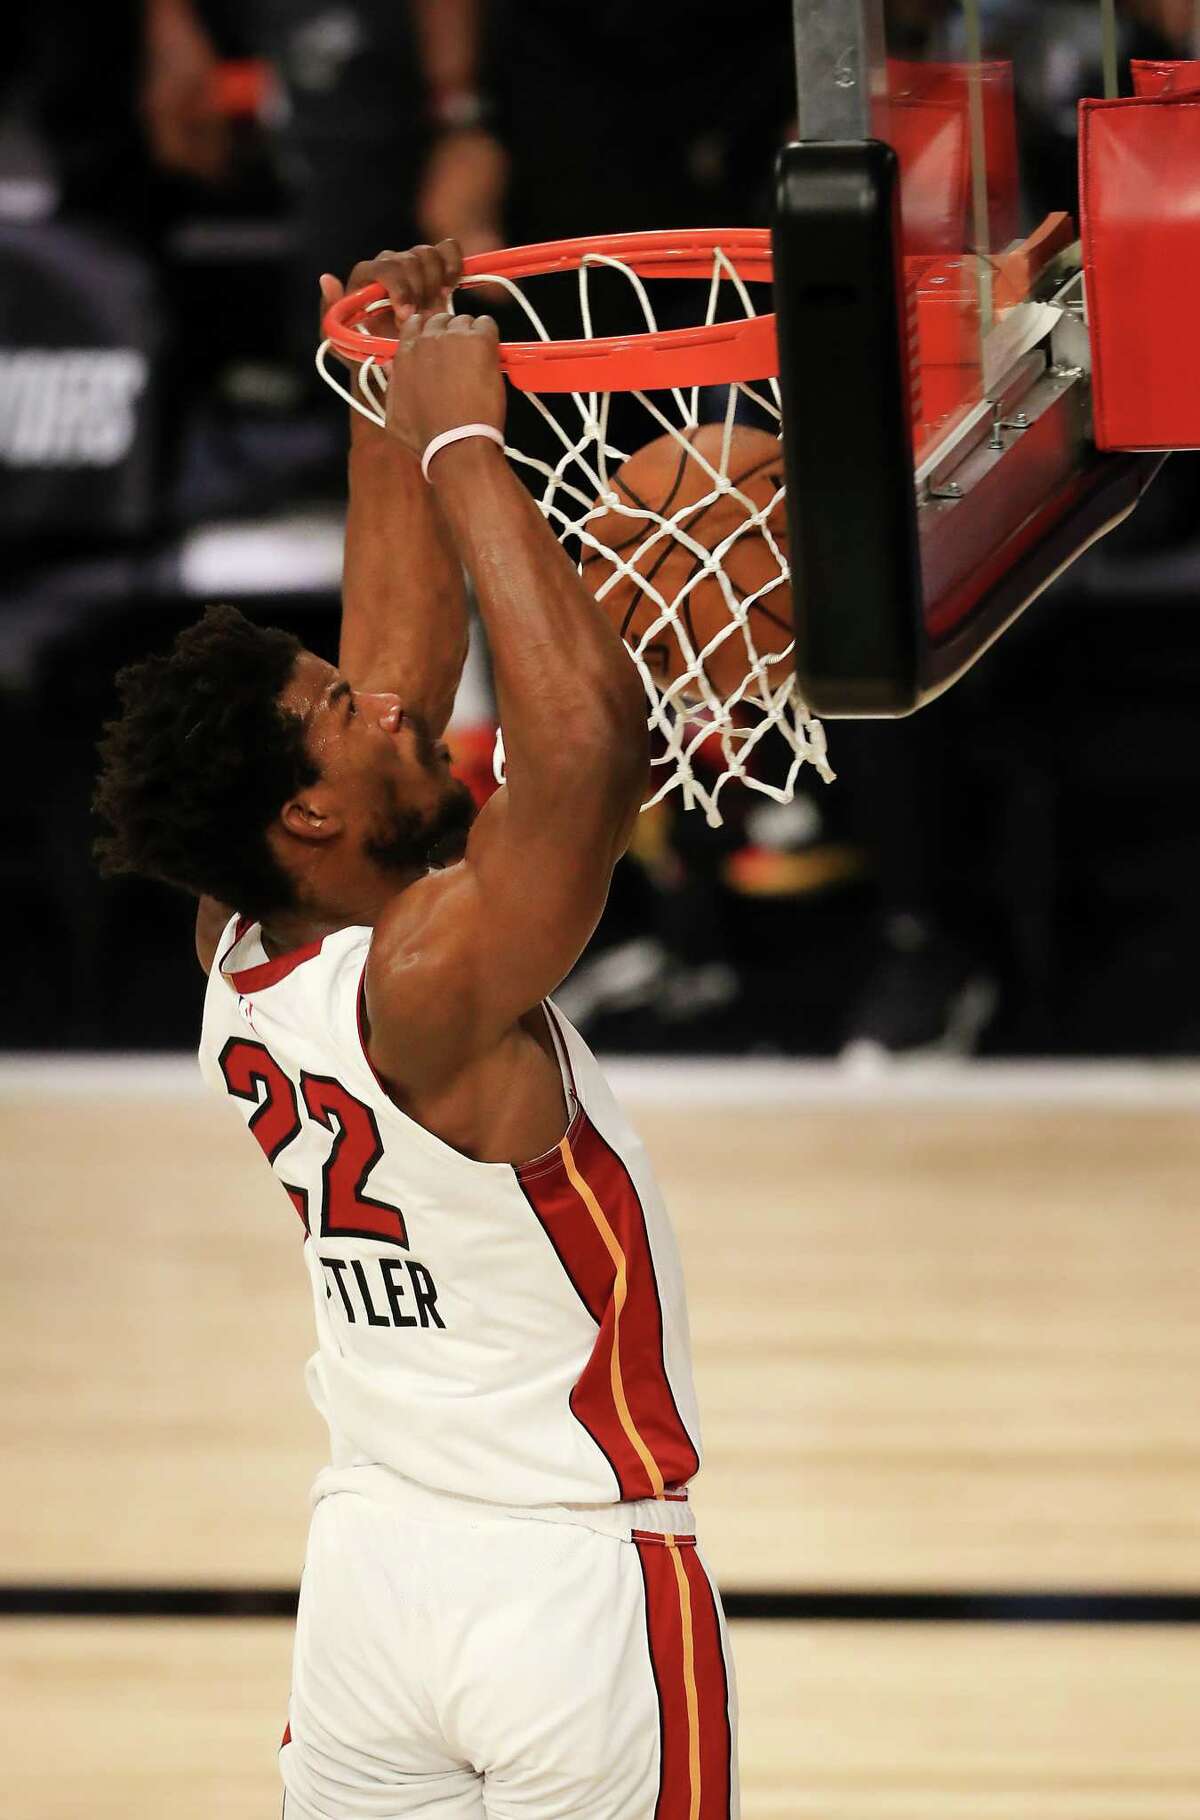 LAKE BUENA VISTA, FLORIDA - SEPTEMBER 02: Jimmy Butler #22 of the Miami Heat dunks the ball during the first quarter against the Milwaukee Bucks in Game Two of the Eastern Conference Second Round during the 2020 NBA Playoffs at the Field House at ESPN Wide World Of Sports Complex on September 02, 2020 in Lake Buena Vista, Florida. NOTE TO USER: User expressly acknowledges and agrees that, by downloading and or using this photograph, User is consenting to the terms and conditions of the Getty Images License Agreement. (Photo by Mike Ehrmann/Getty Images)